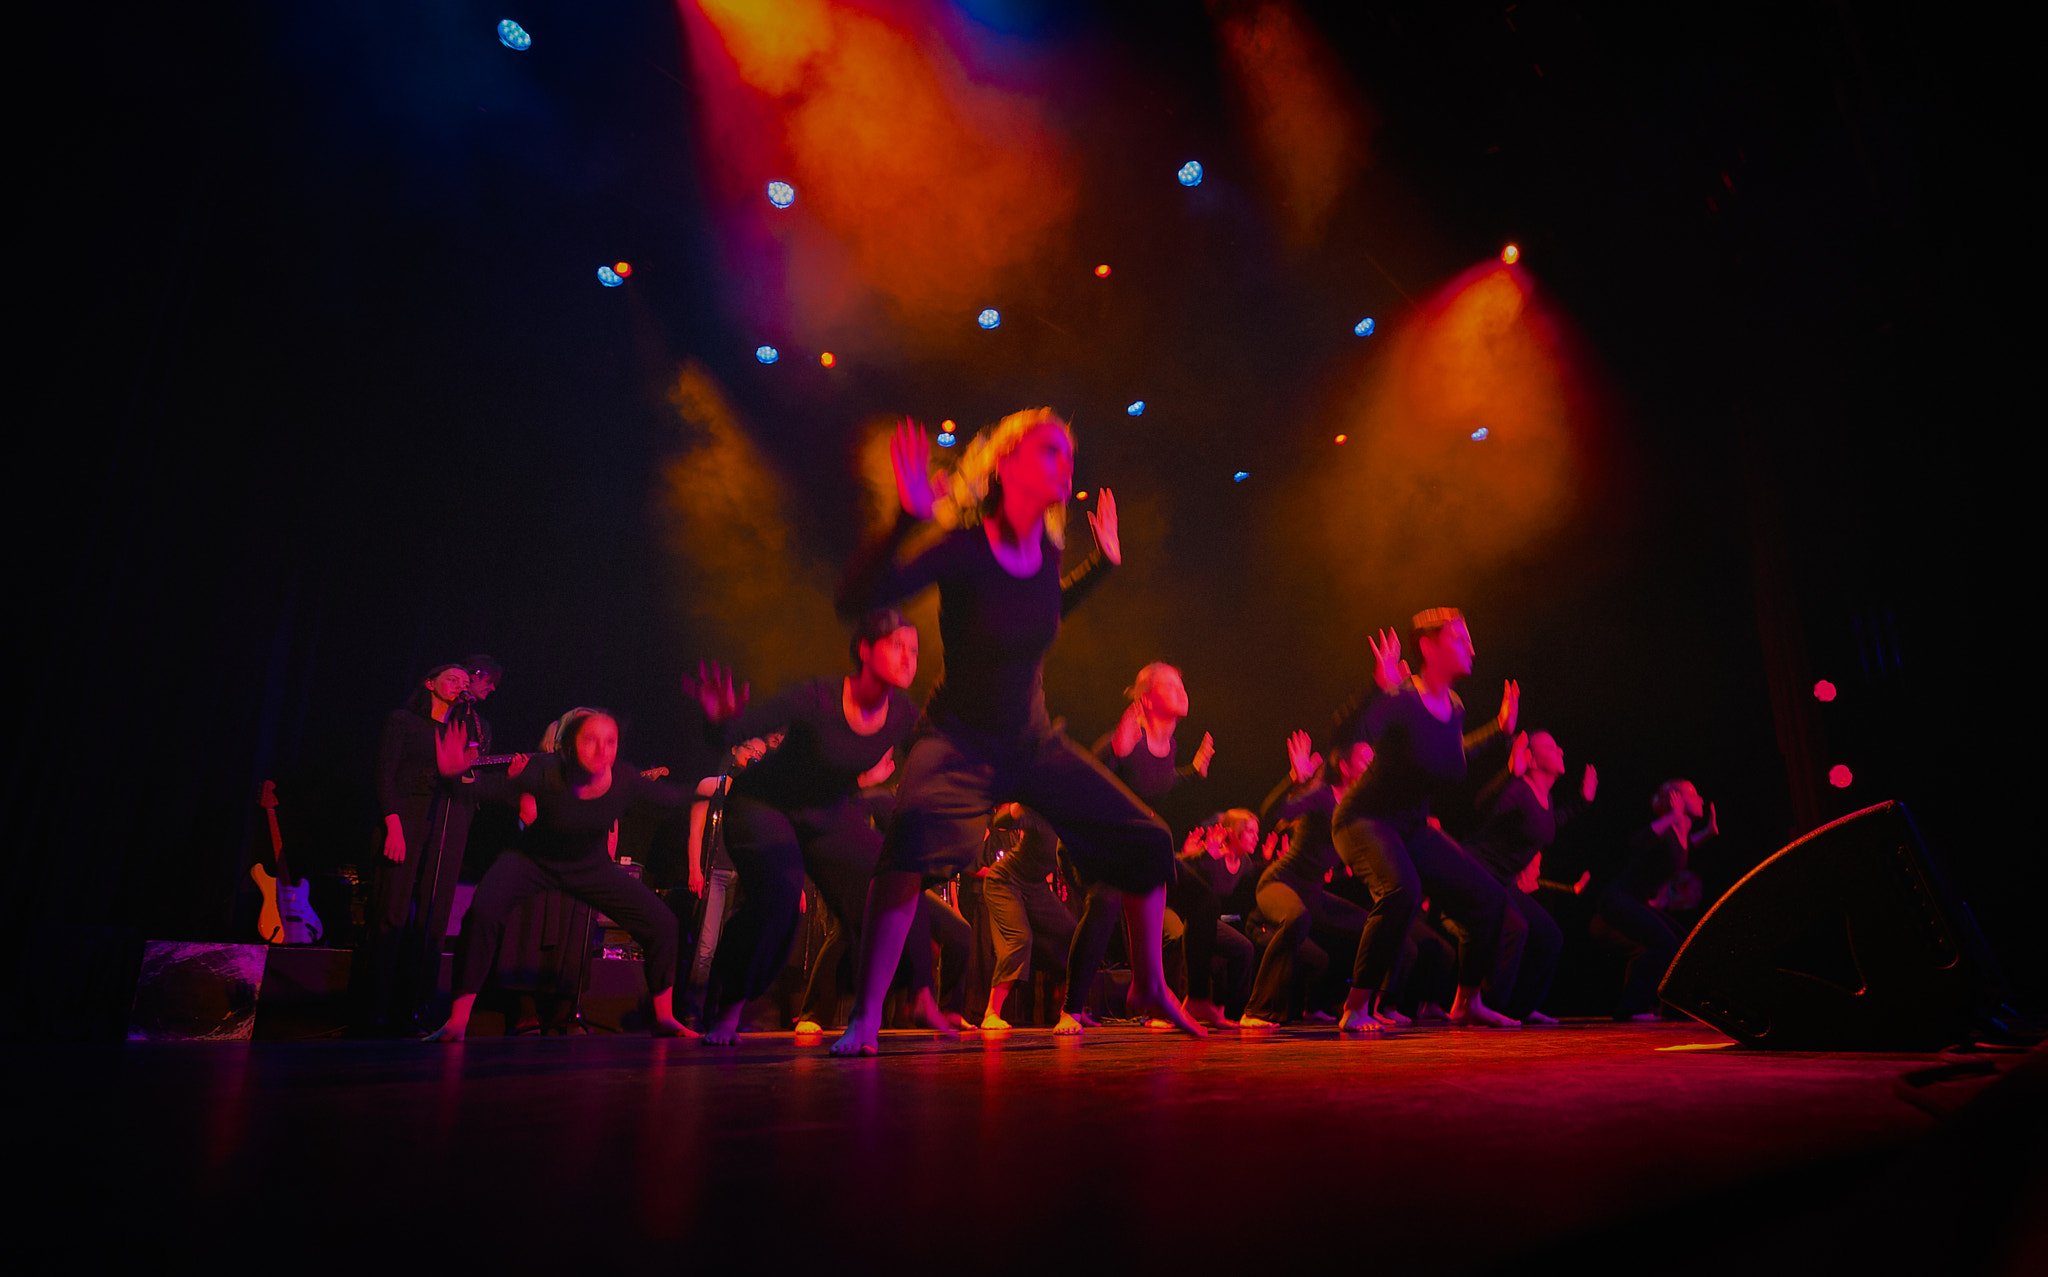 Tamron SP 15-30mm F2.8 Di VC USD sample photo. Dance maxim theater stockholm photography